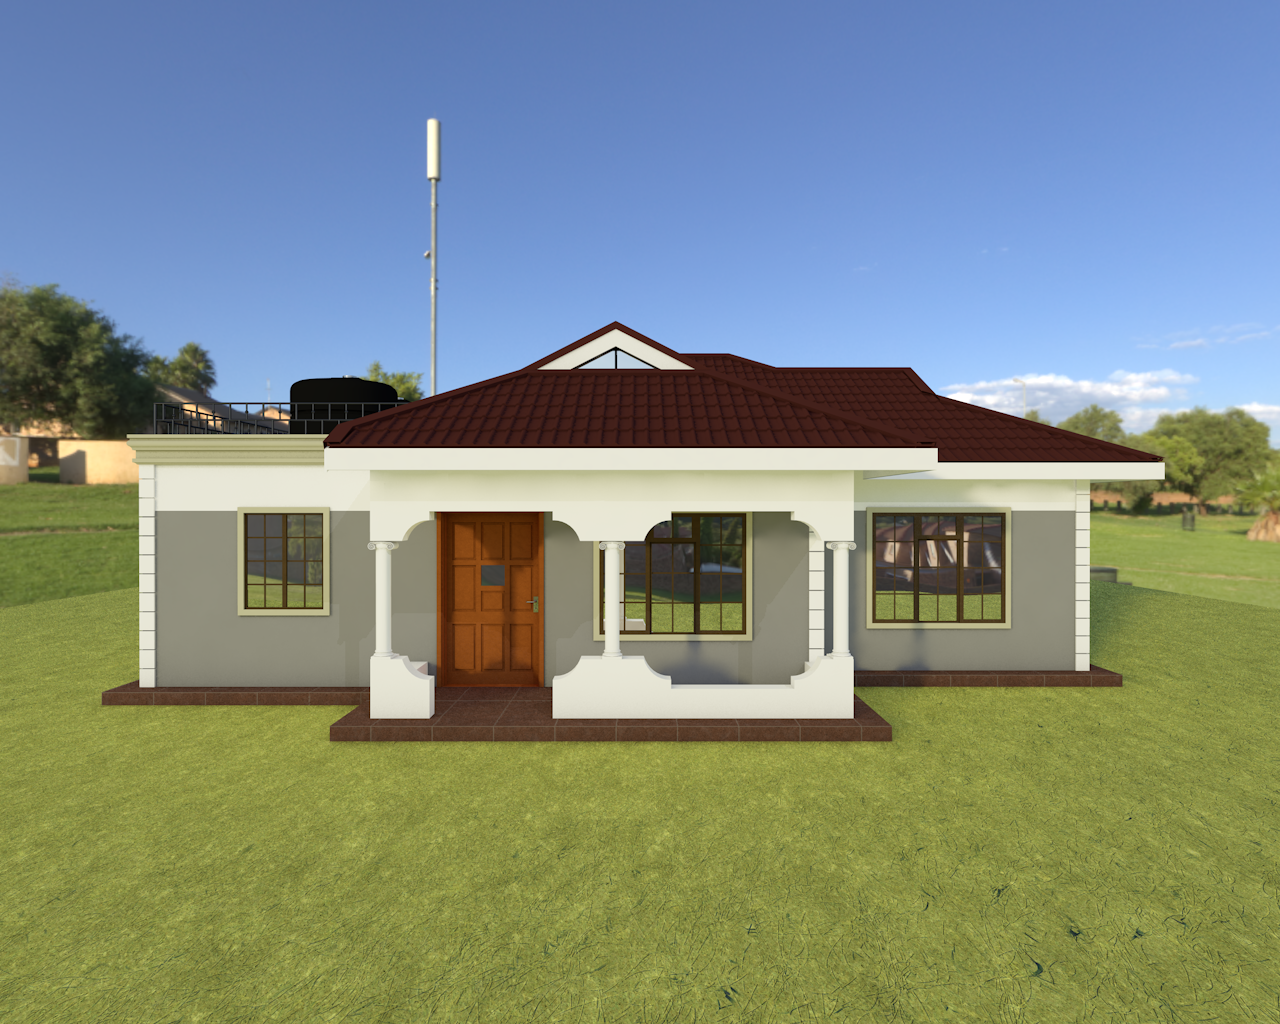 A Two Bedroom Bungalow House Plan